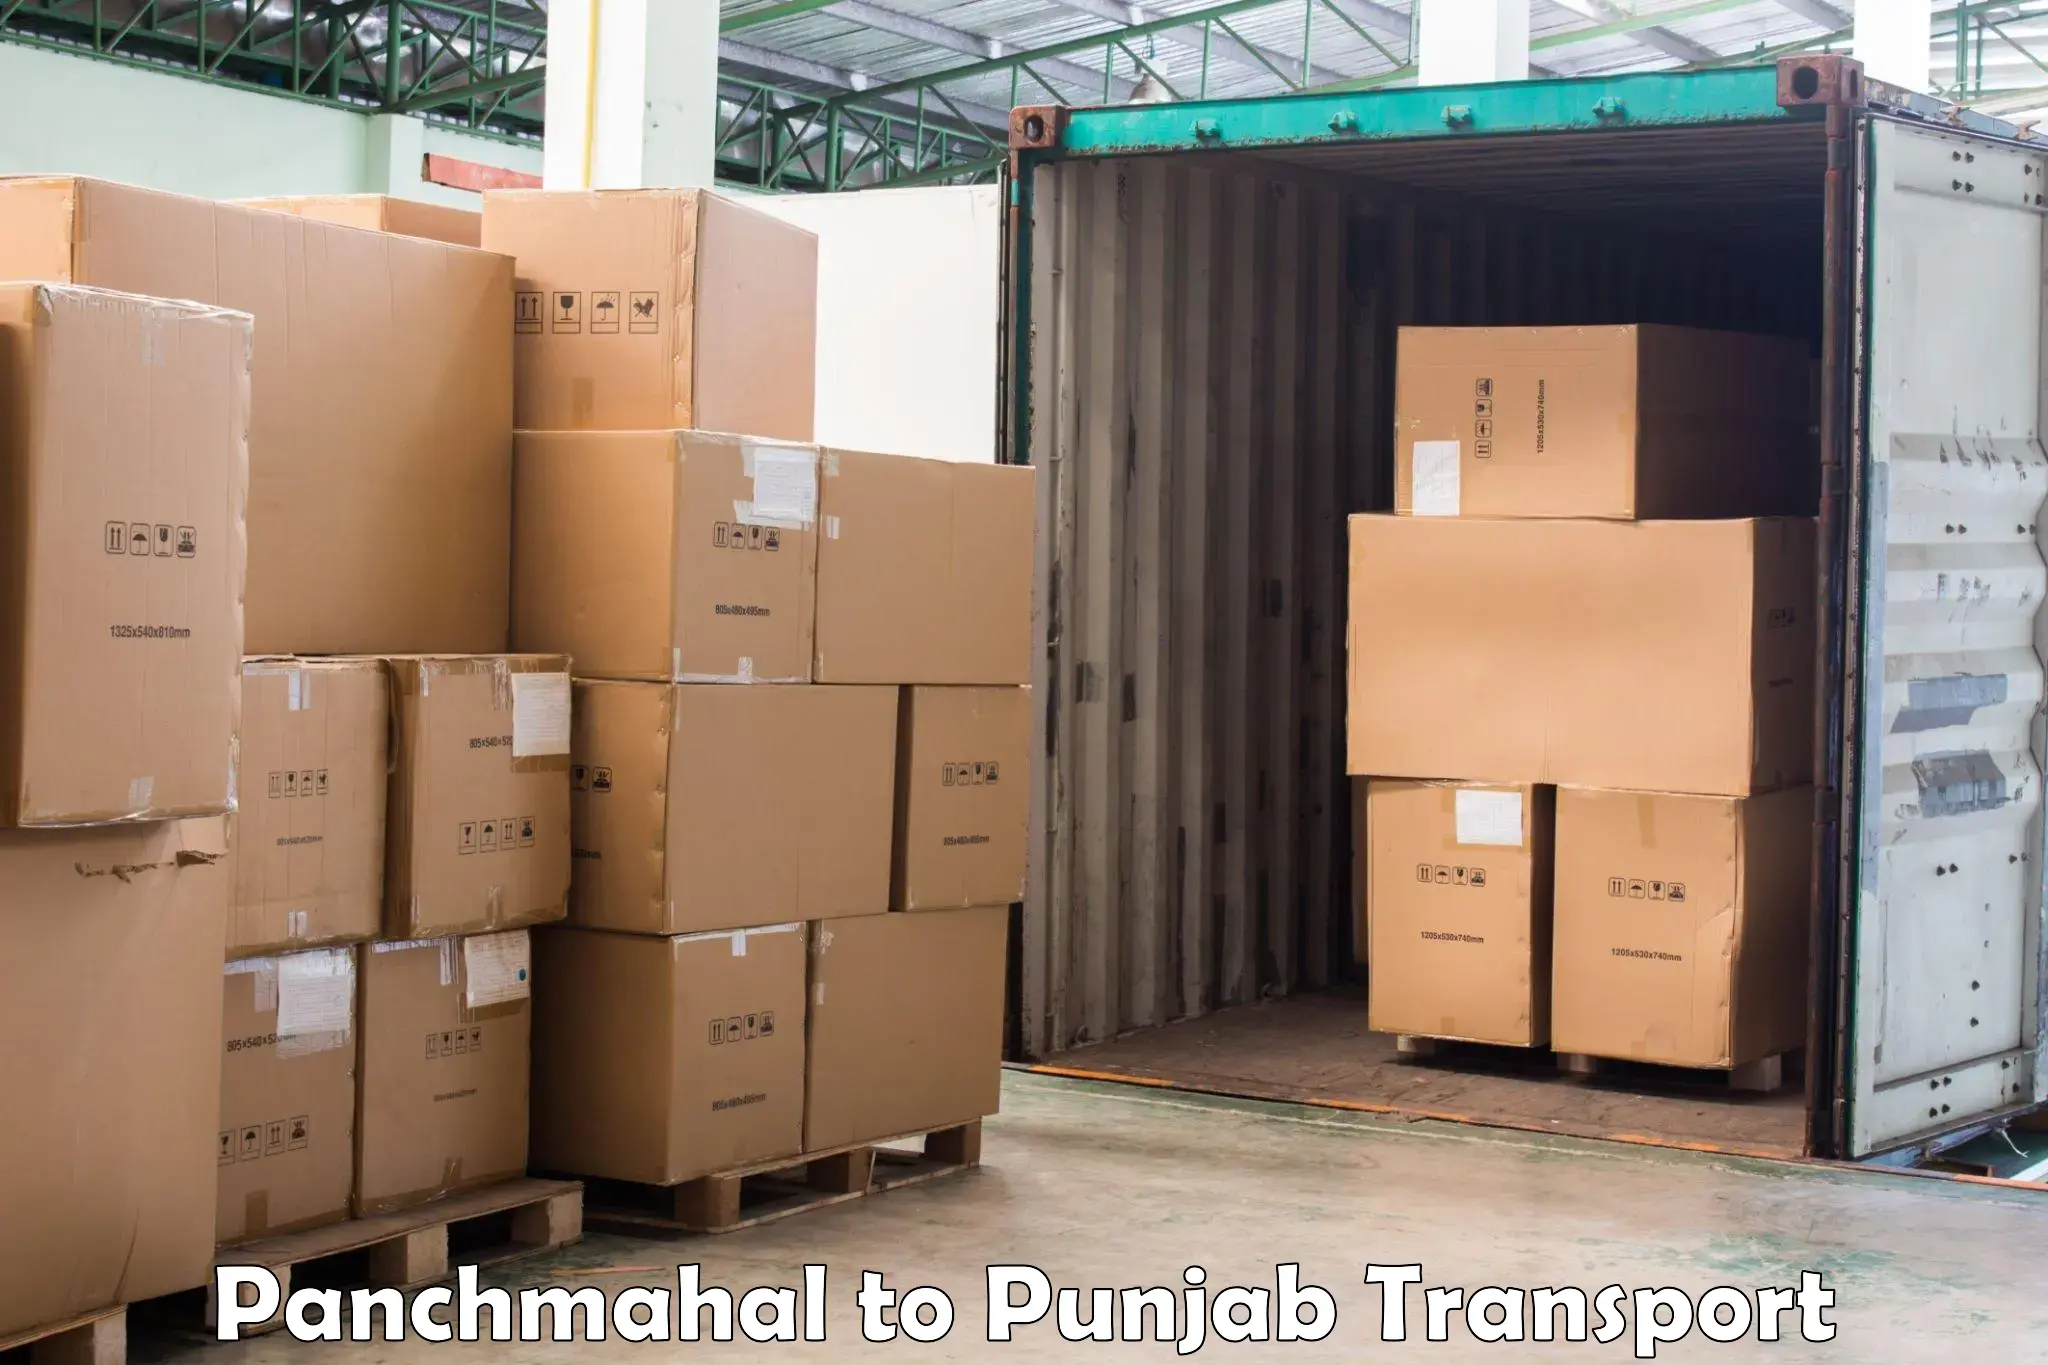 Road transport services in Panchmahal to Amritsar